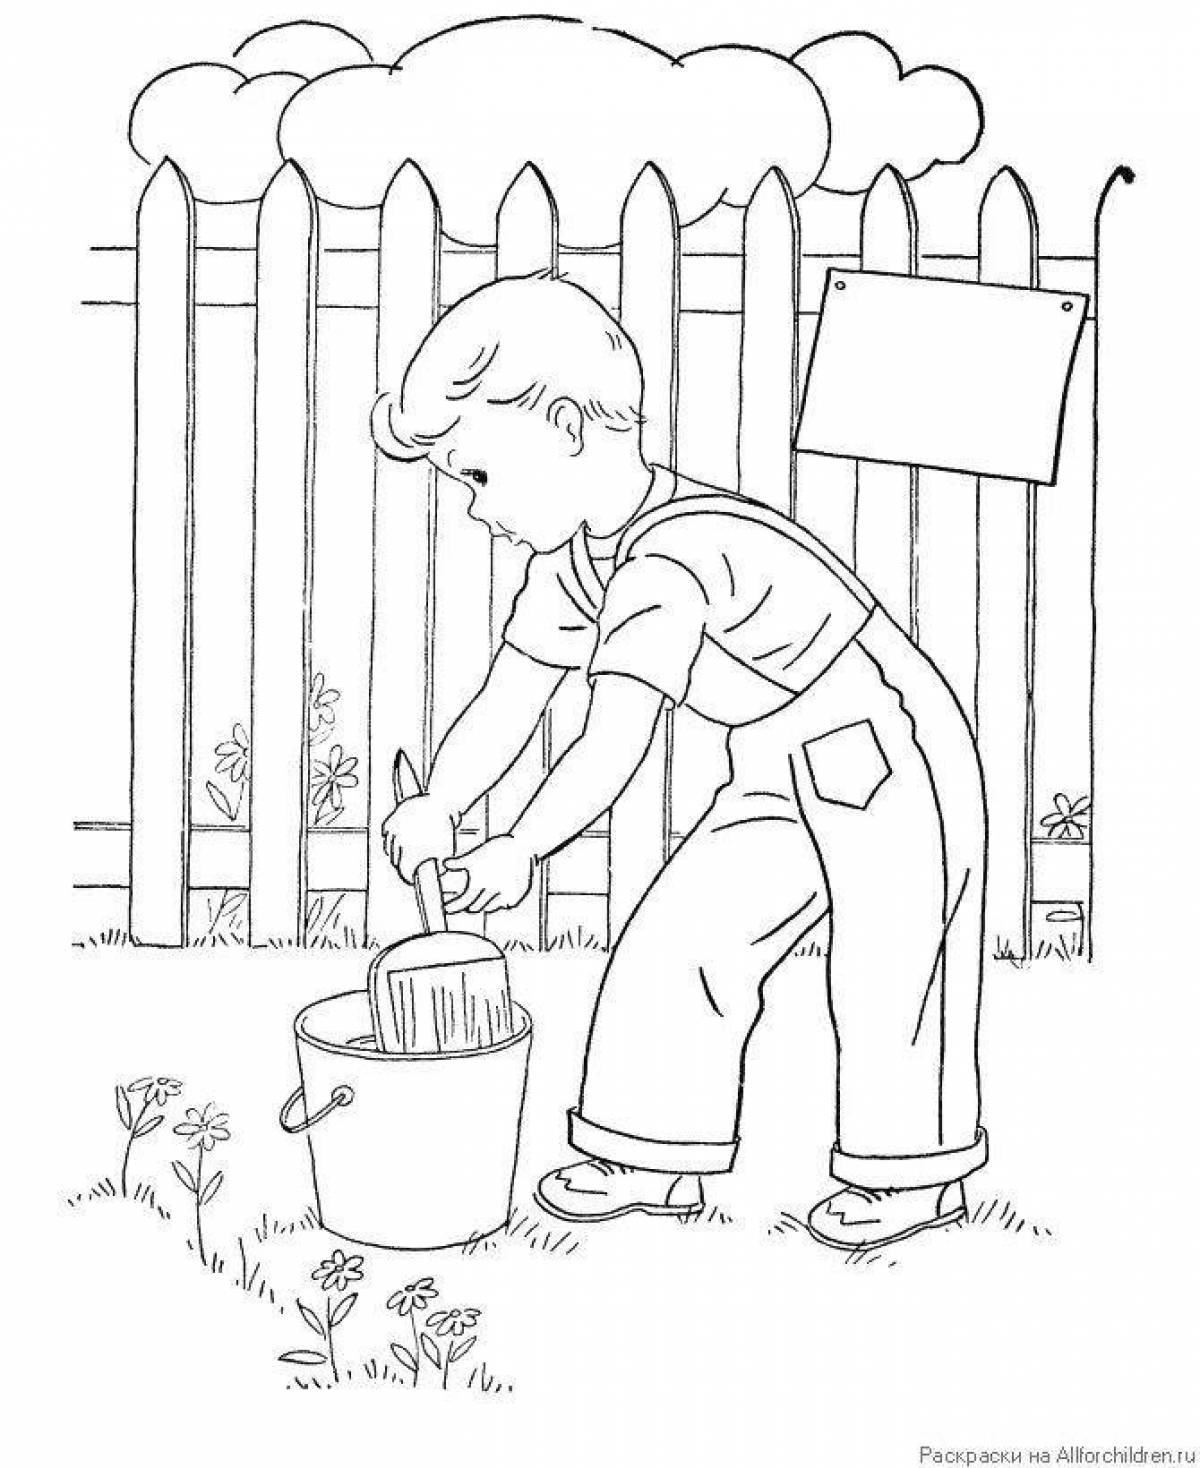 Photo Charming tom sawyer coloring page